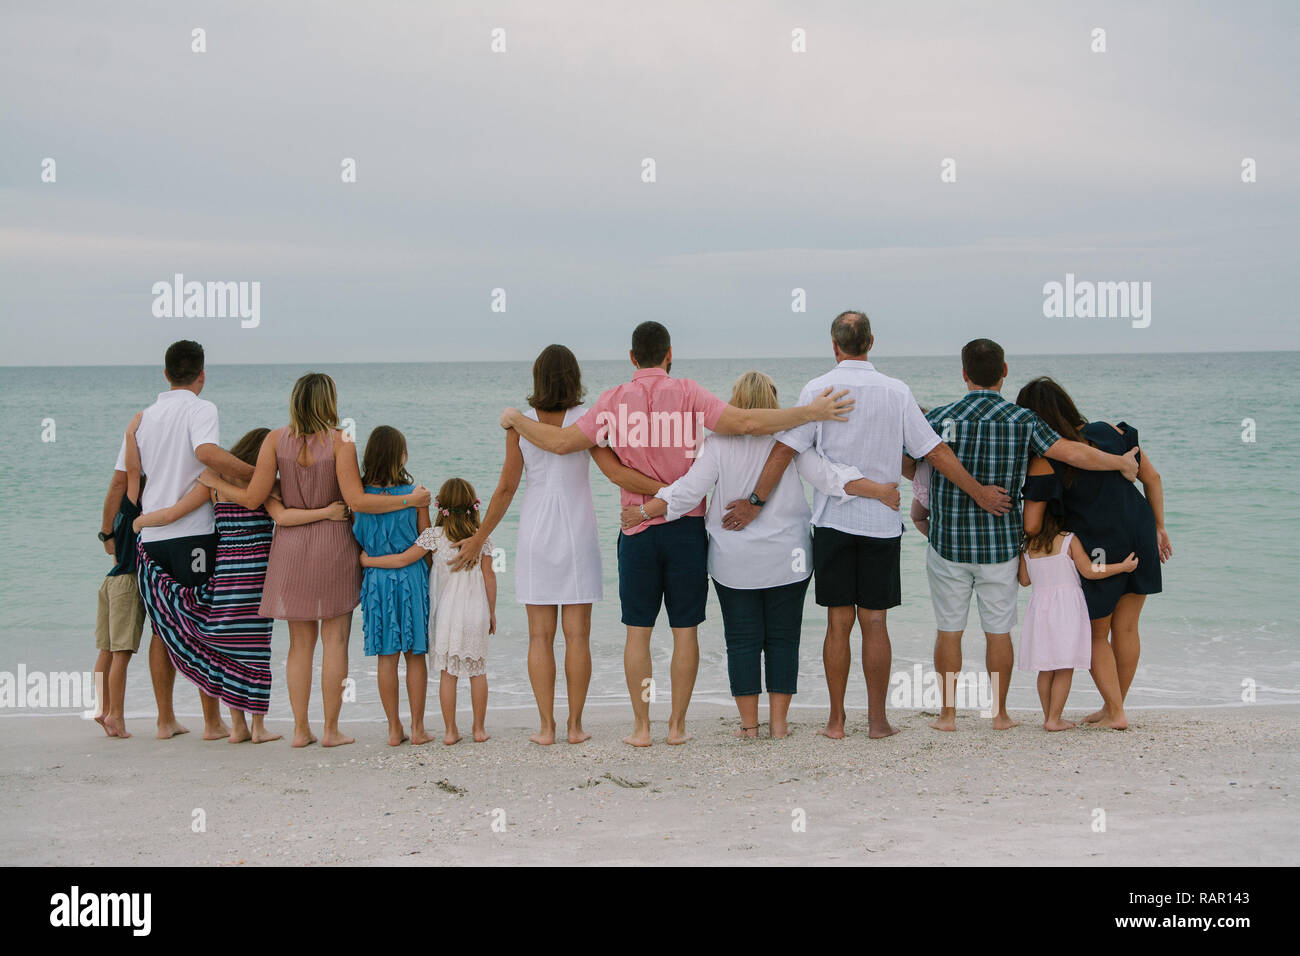 Huge Happy Traveling Caucasian Family with Adults and Kids at the Beach Hugging while facing the Ocean Horizon Outside on Destination Vacation Stock Photo